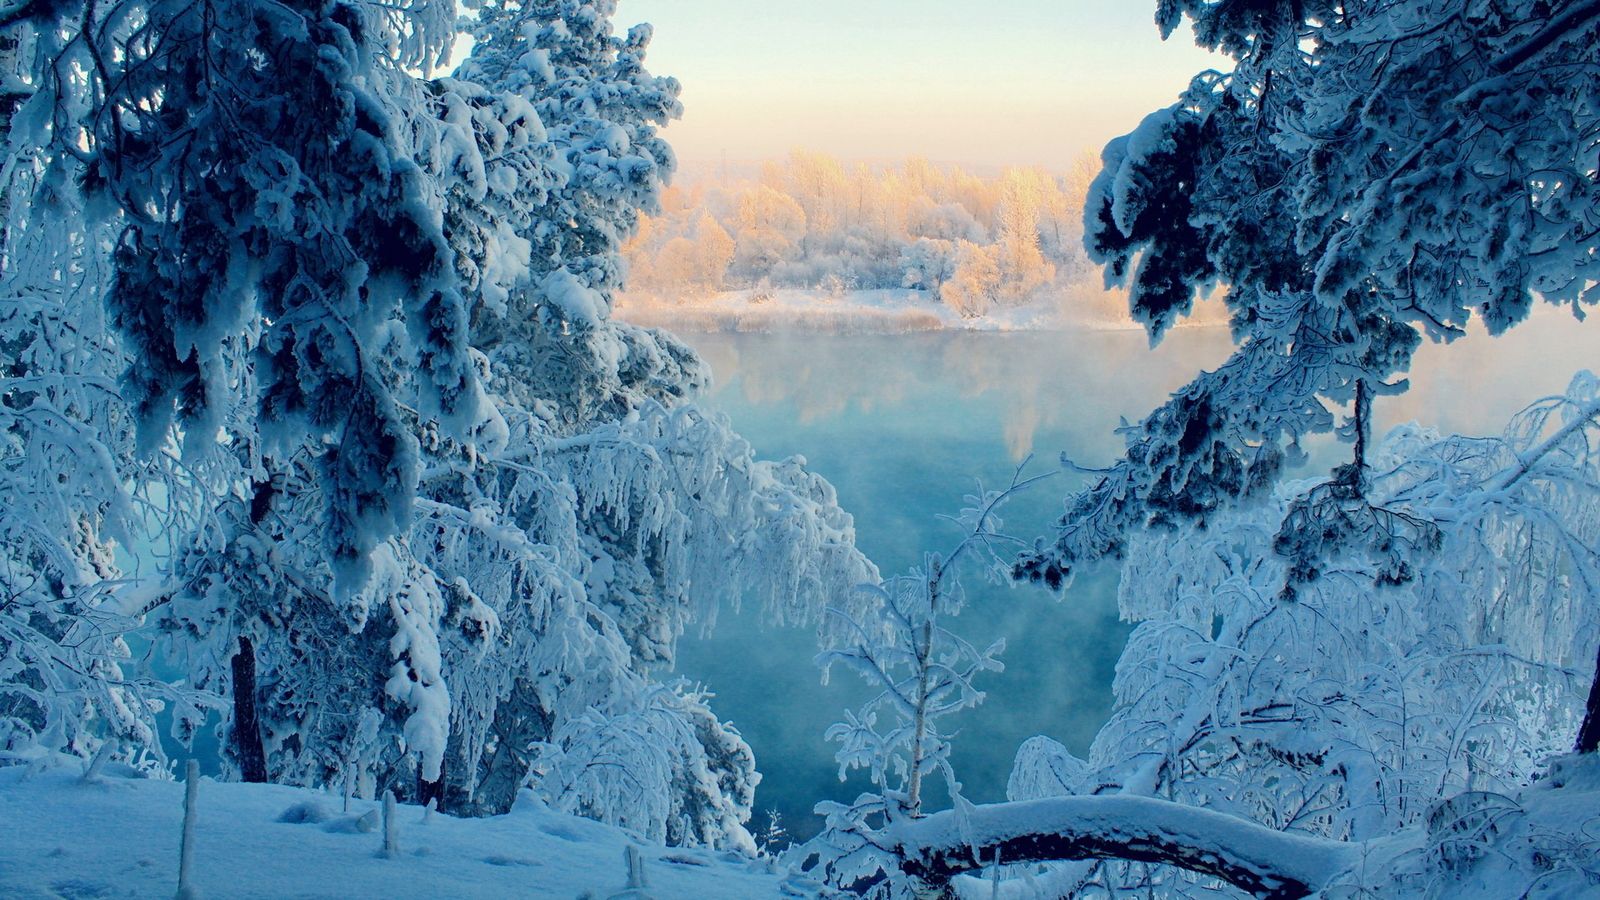 A snow covered forest with a frozen lake in the background. - Winter, nature, snow